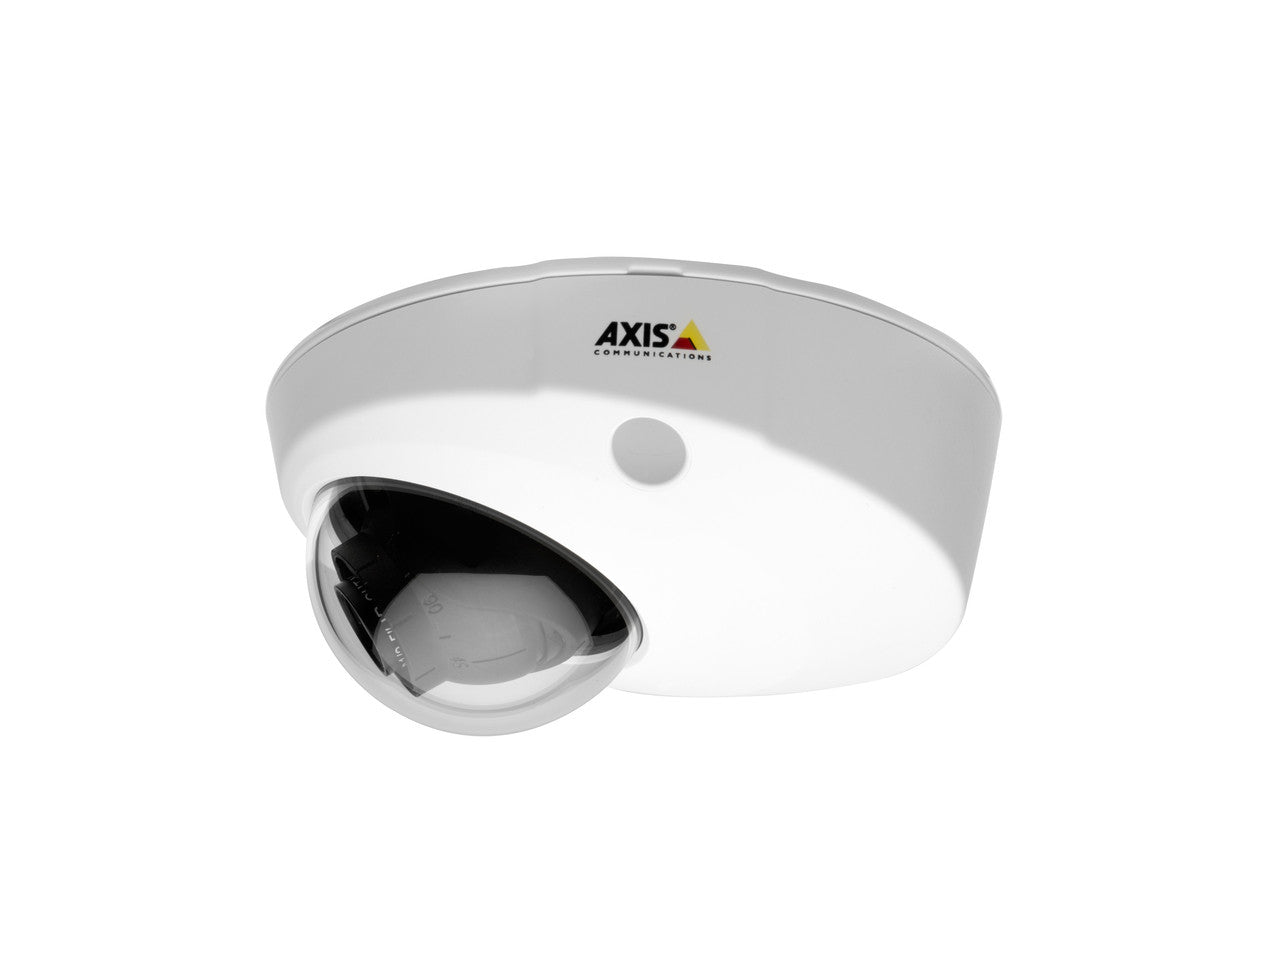 AXIS P3904-R